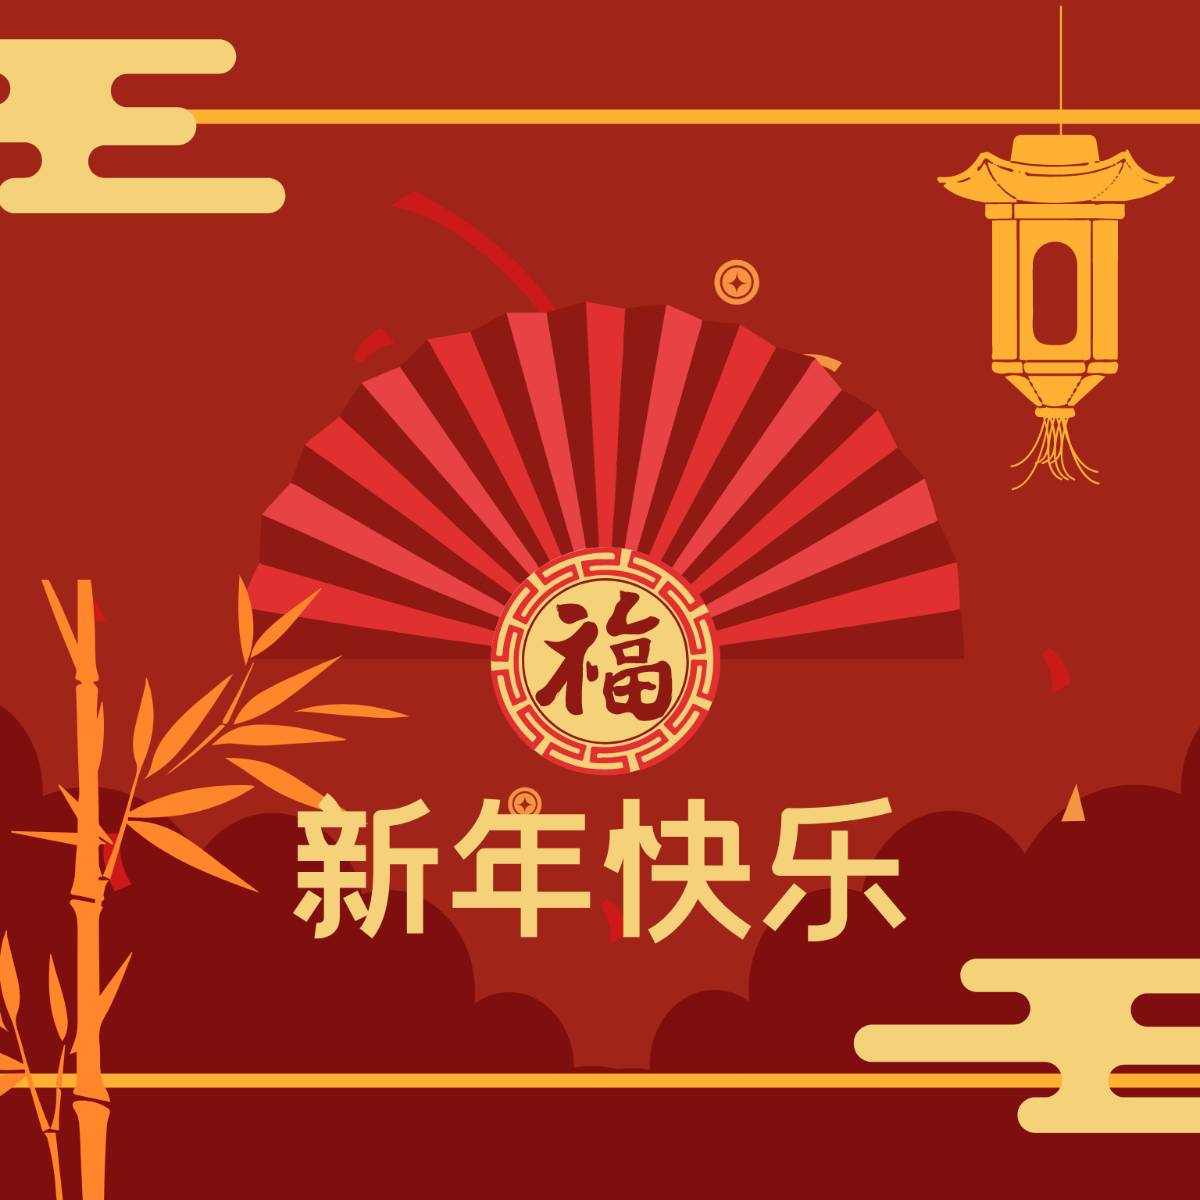 Chinese New Year Design Vector Template